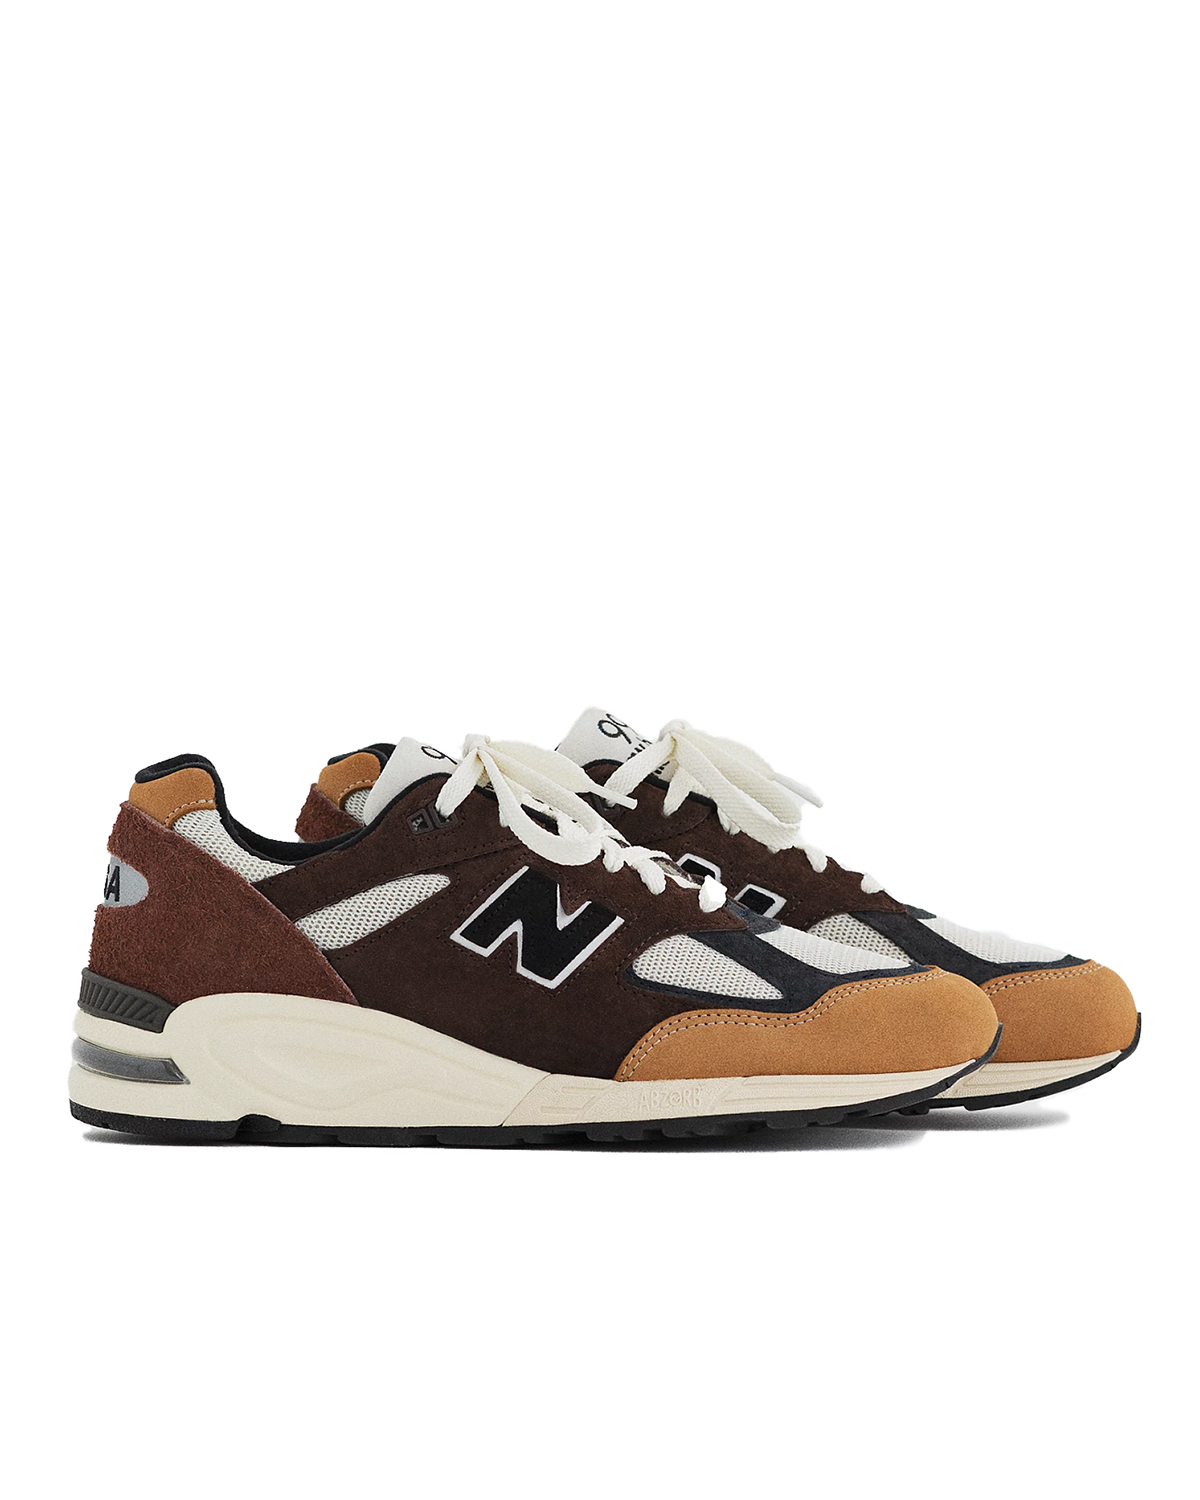 990v2 Made in USA 'Brown'